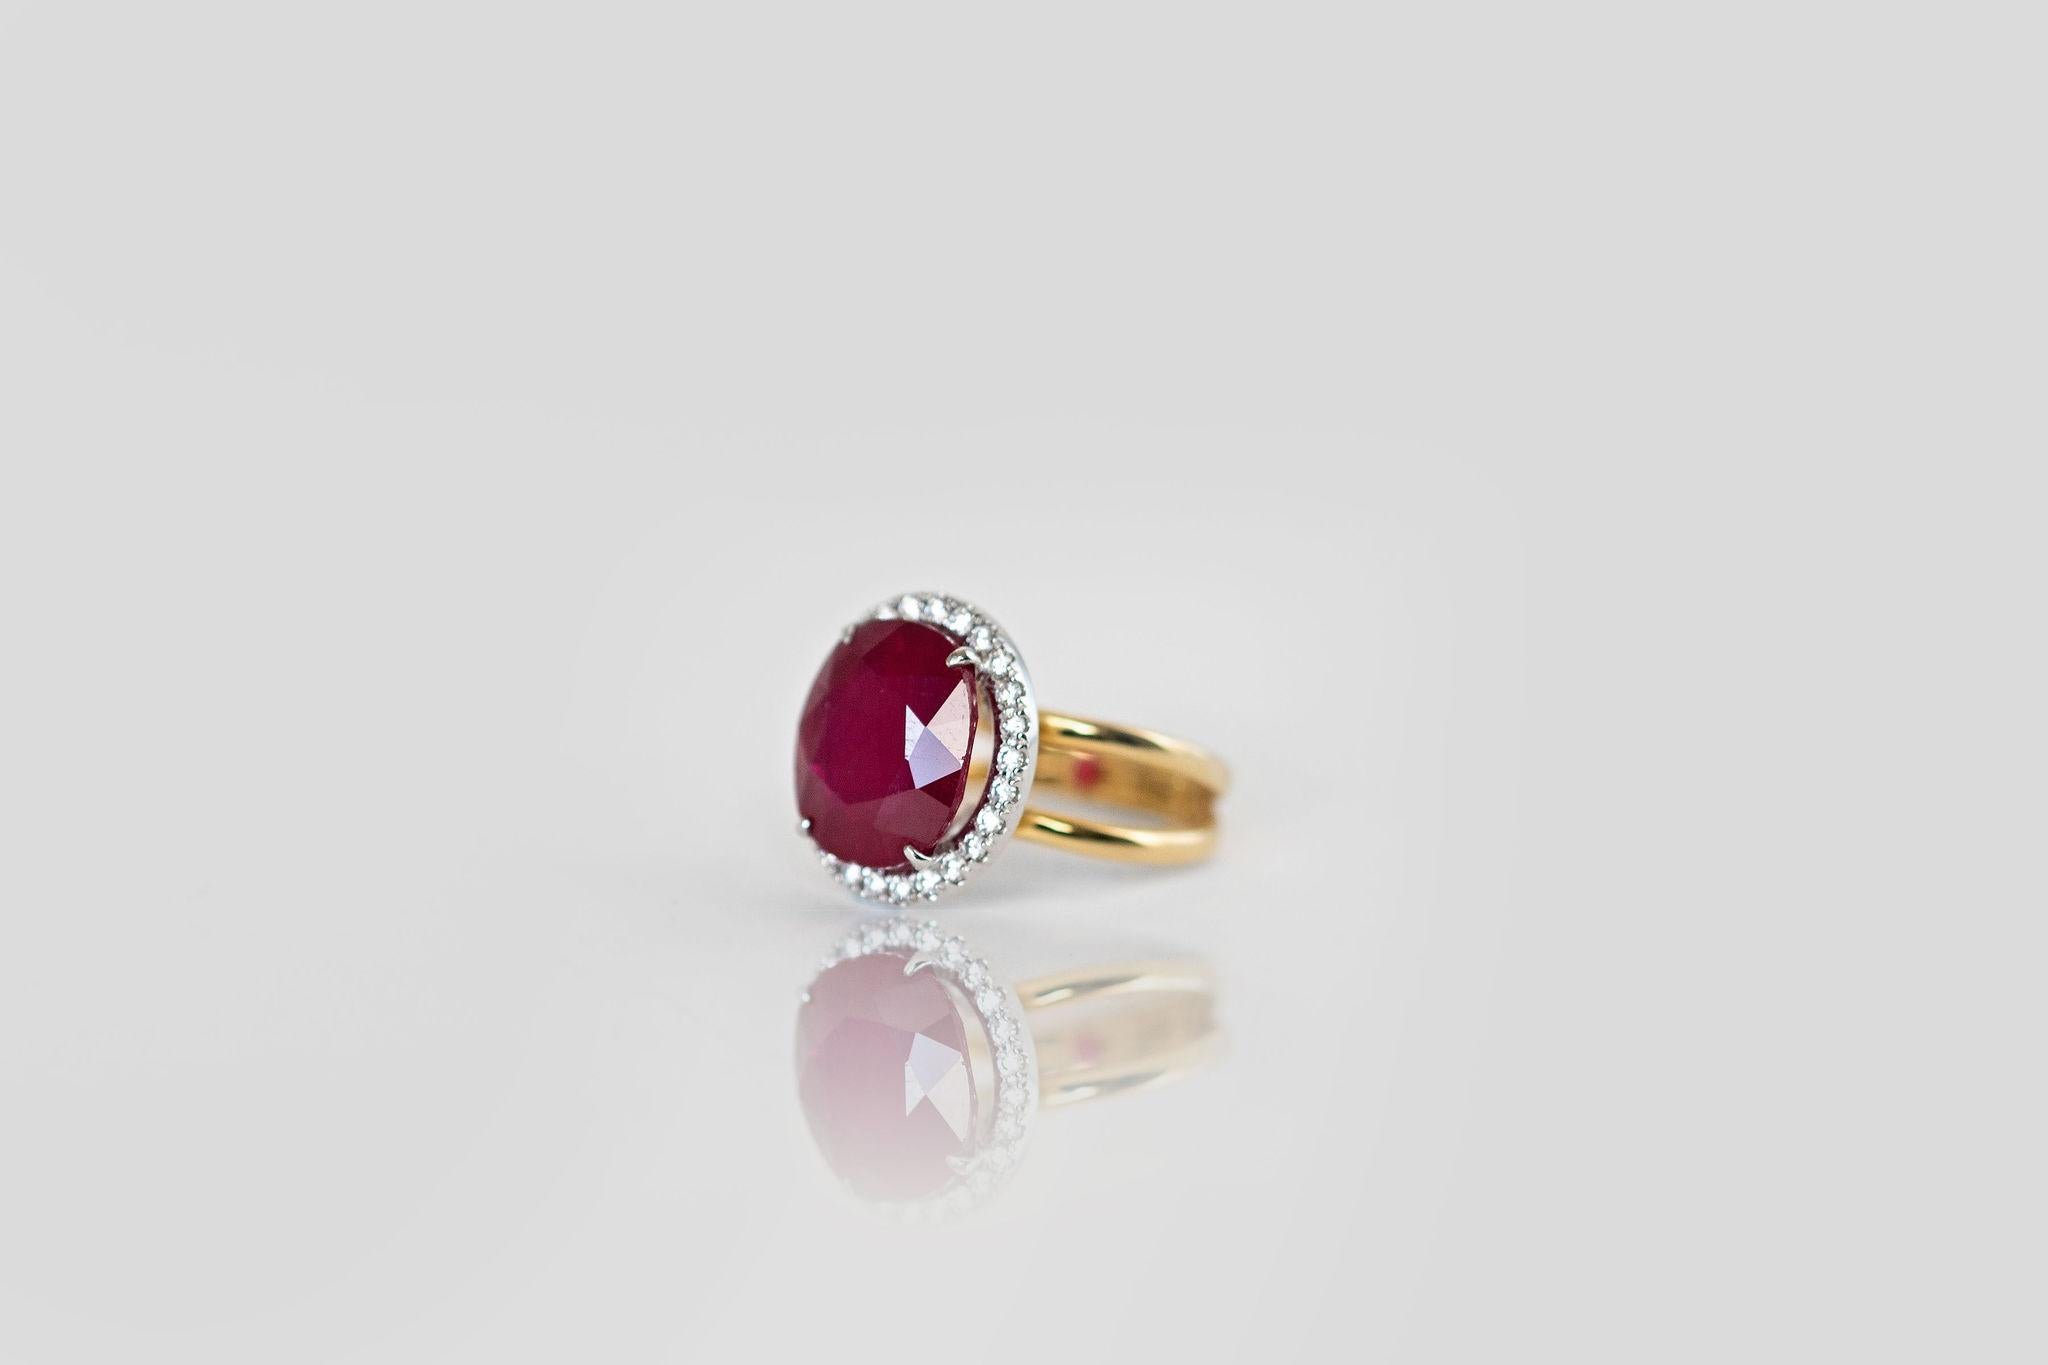 Modern Certified 9 Carat Red Ruby and Diamond Ring, 14k Yellow Gold